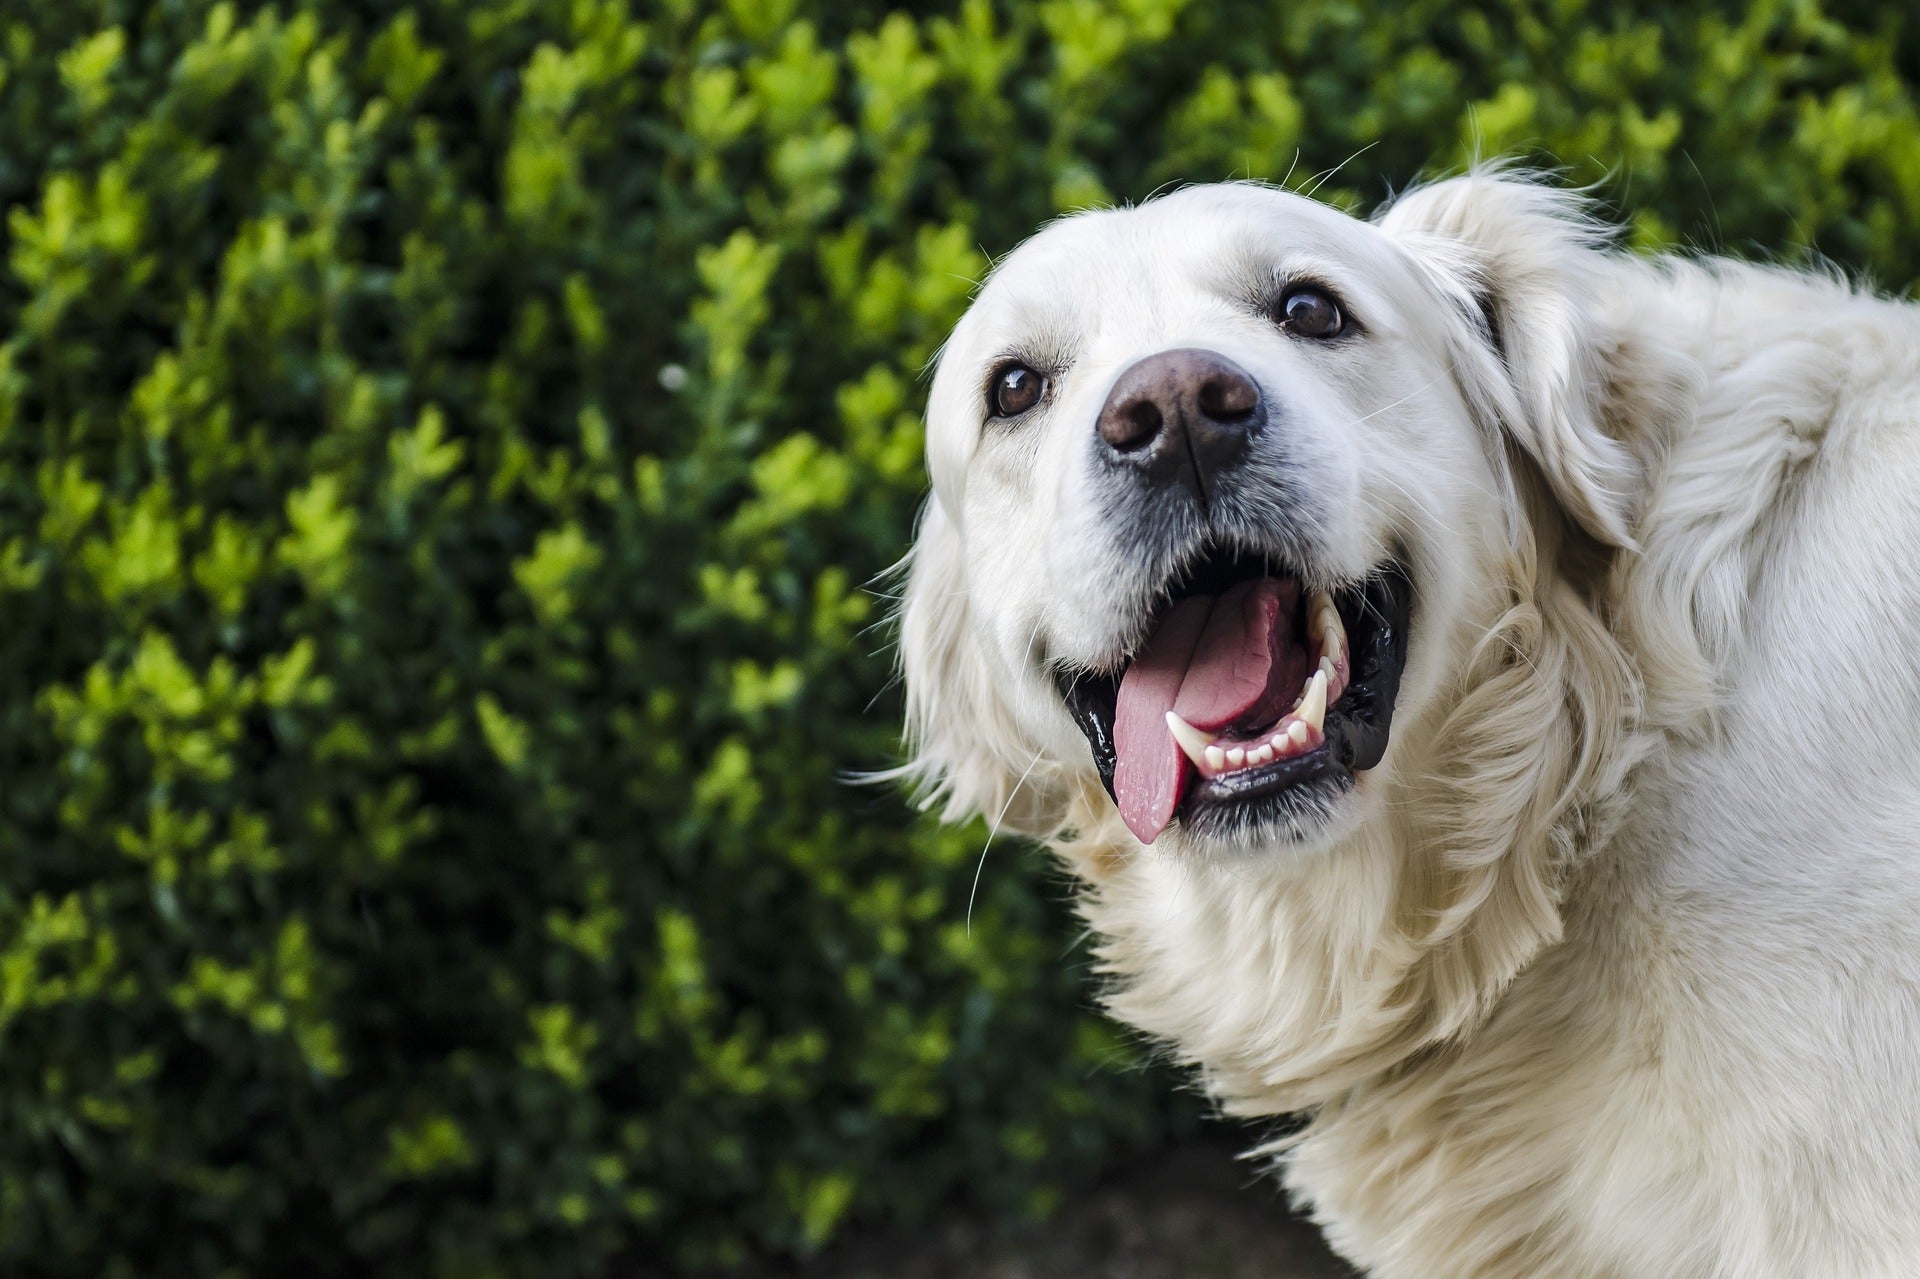 A Closer Look At Stomatitis and Its Effects on Dogs